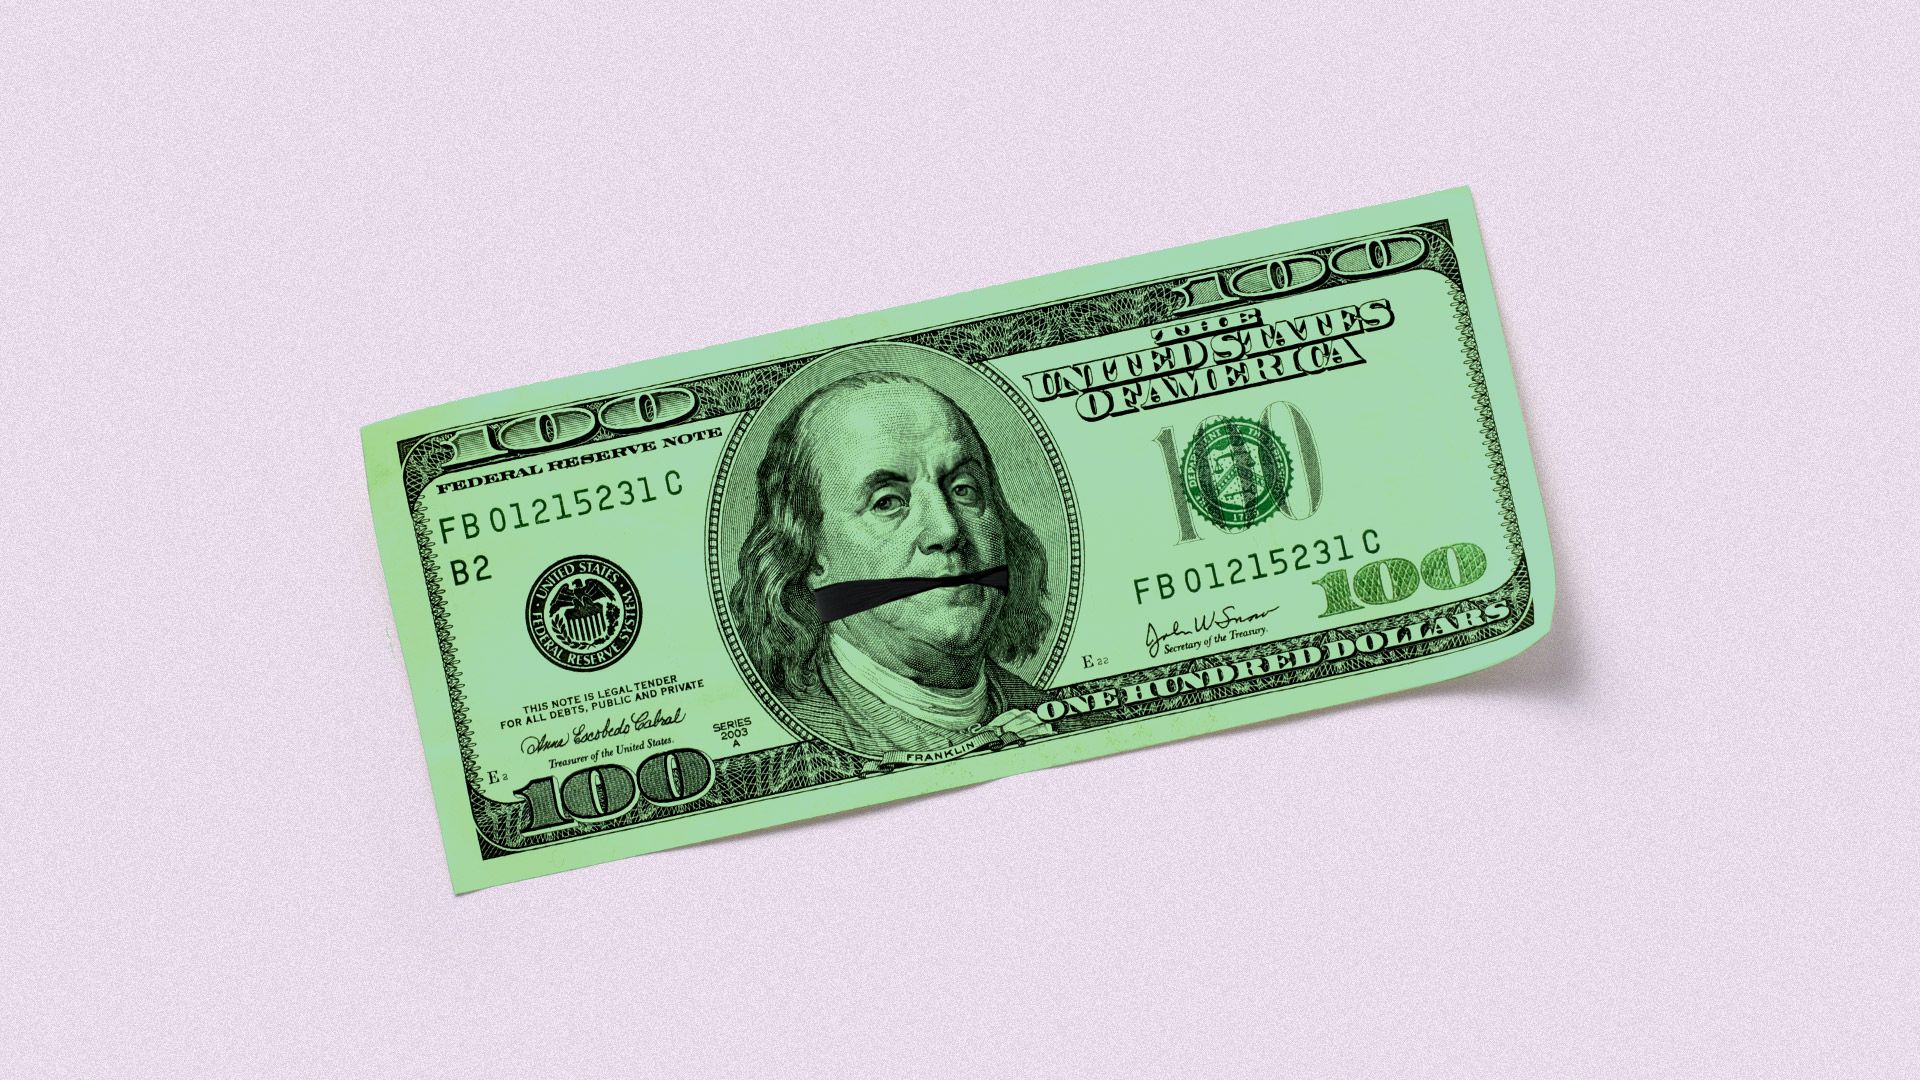 Illustration of a hundred dollar bill with a gag around Benjamin Franklin's mouth